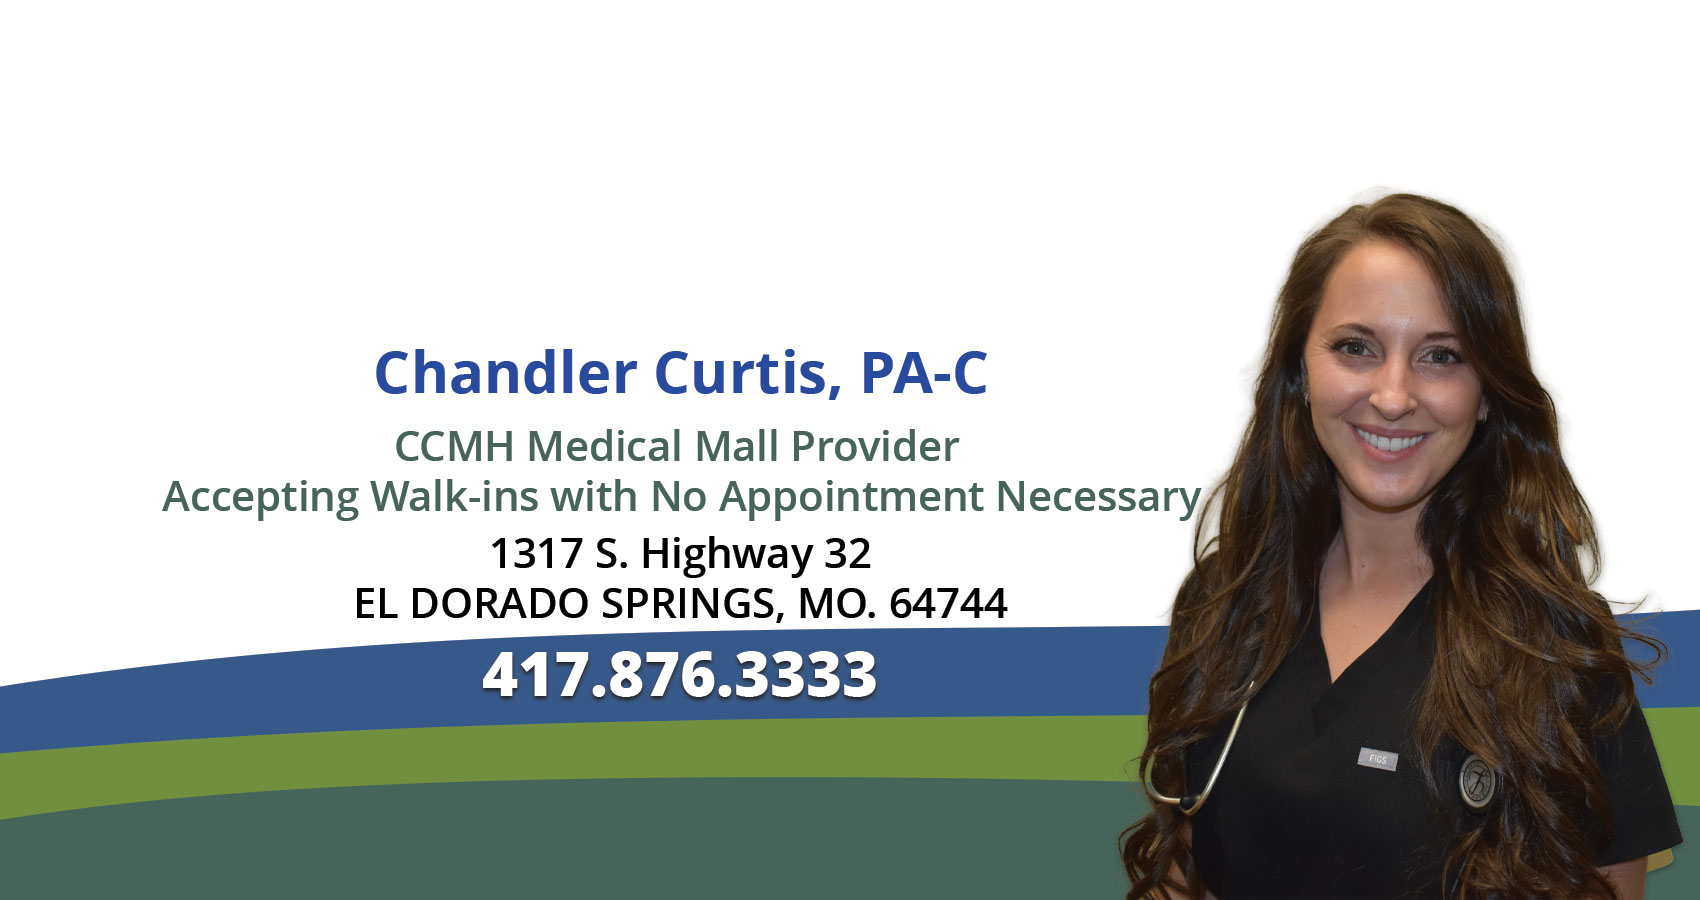 Chandler Curtis, PA-C
CCMH Medical Mall Provider 
Accepting Walk-ins with No Appointment Necessary
1317 S. Highway 32
EL DORADO SPRINGS, MO. 64744
417.876.3333